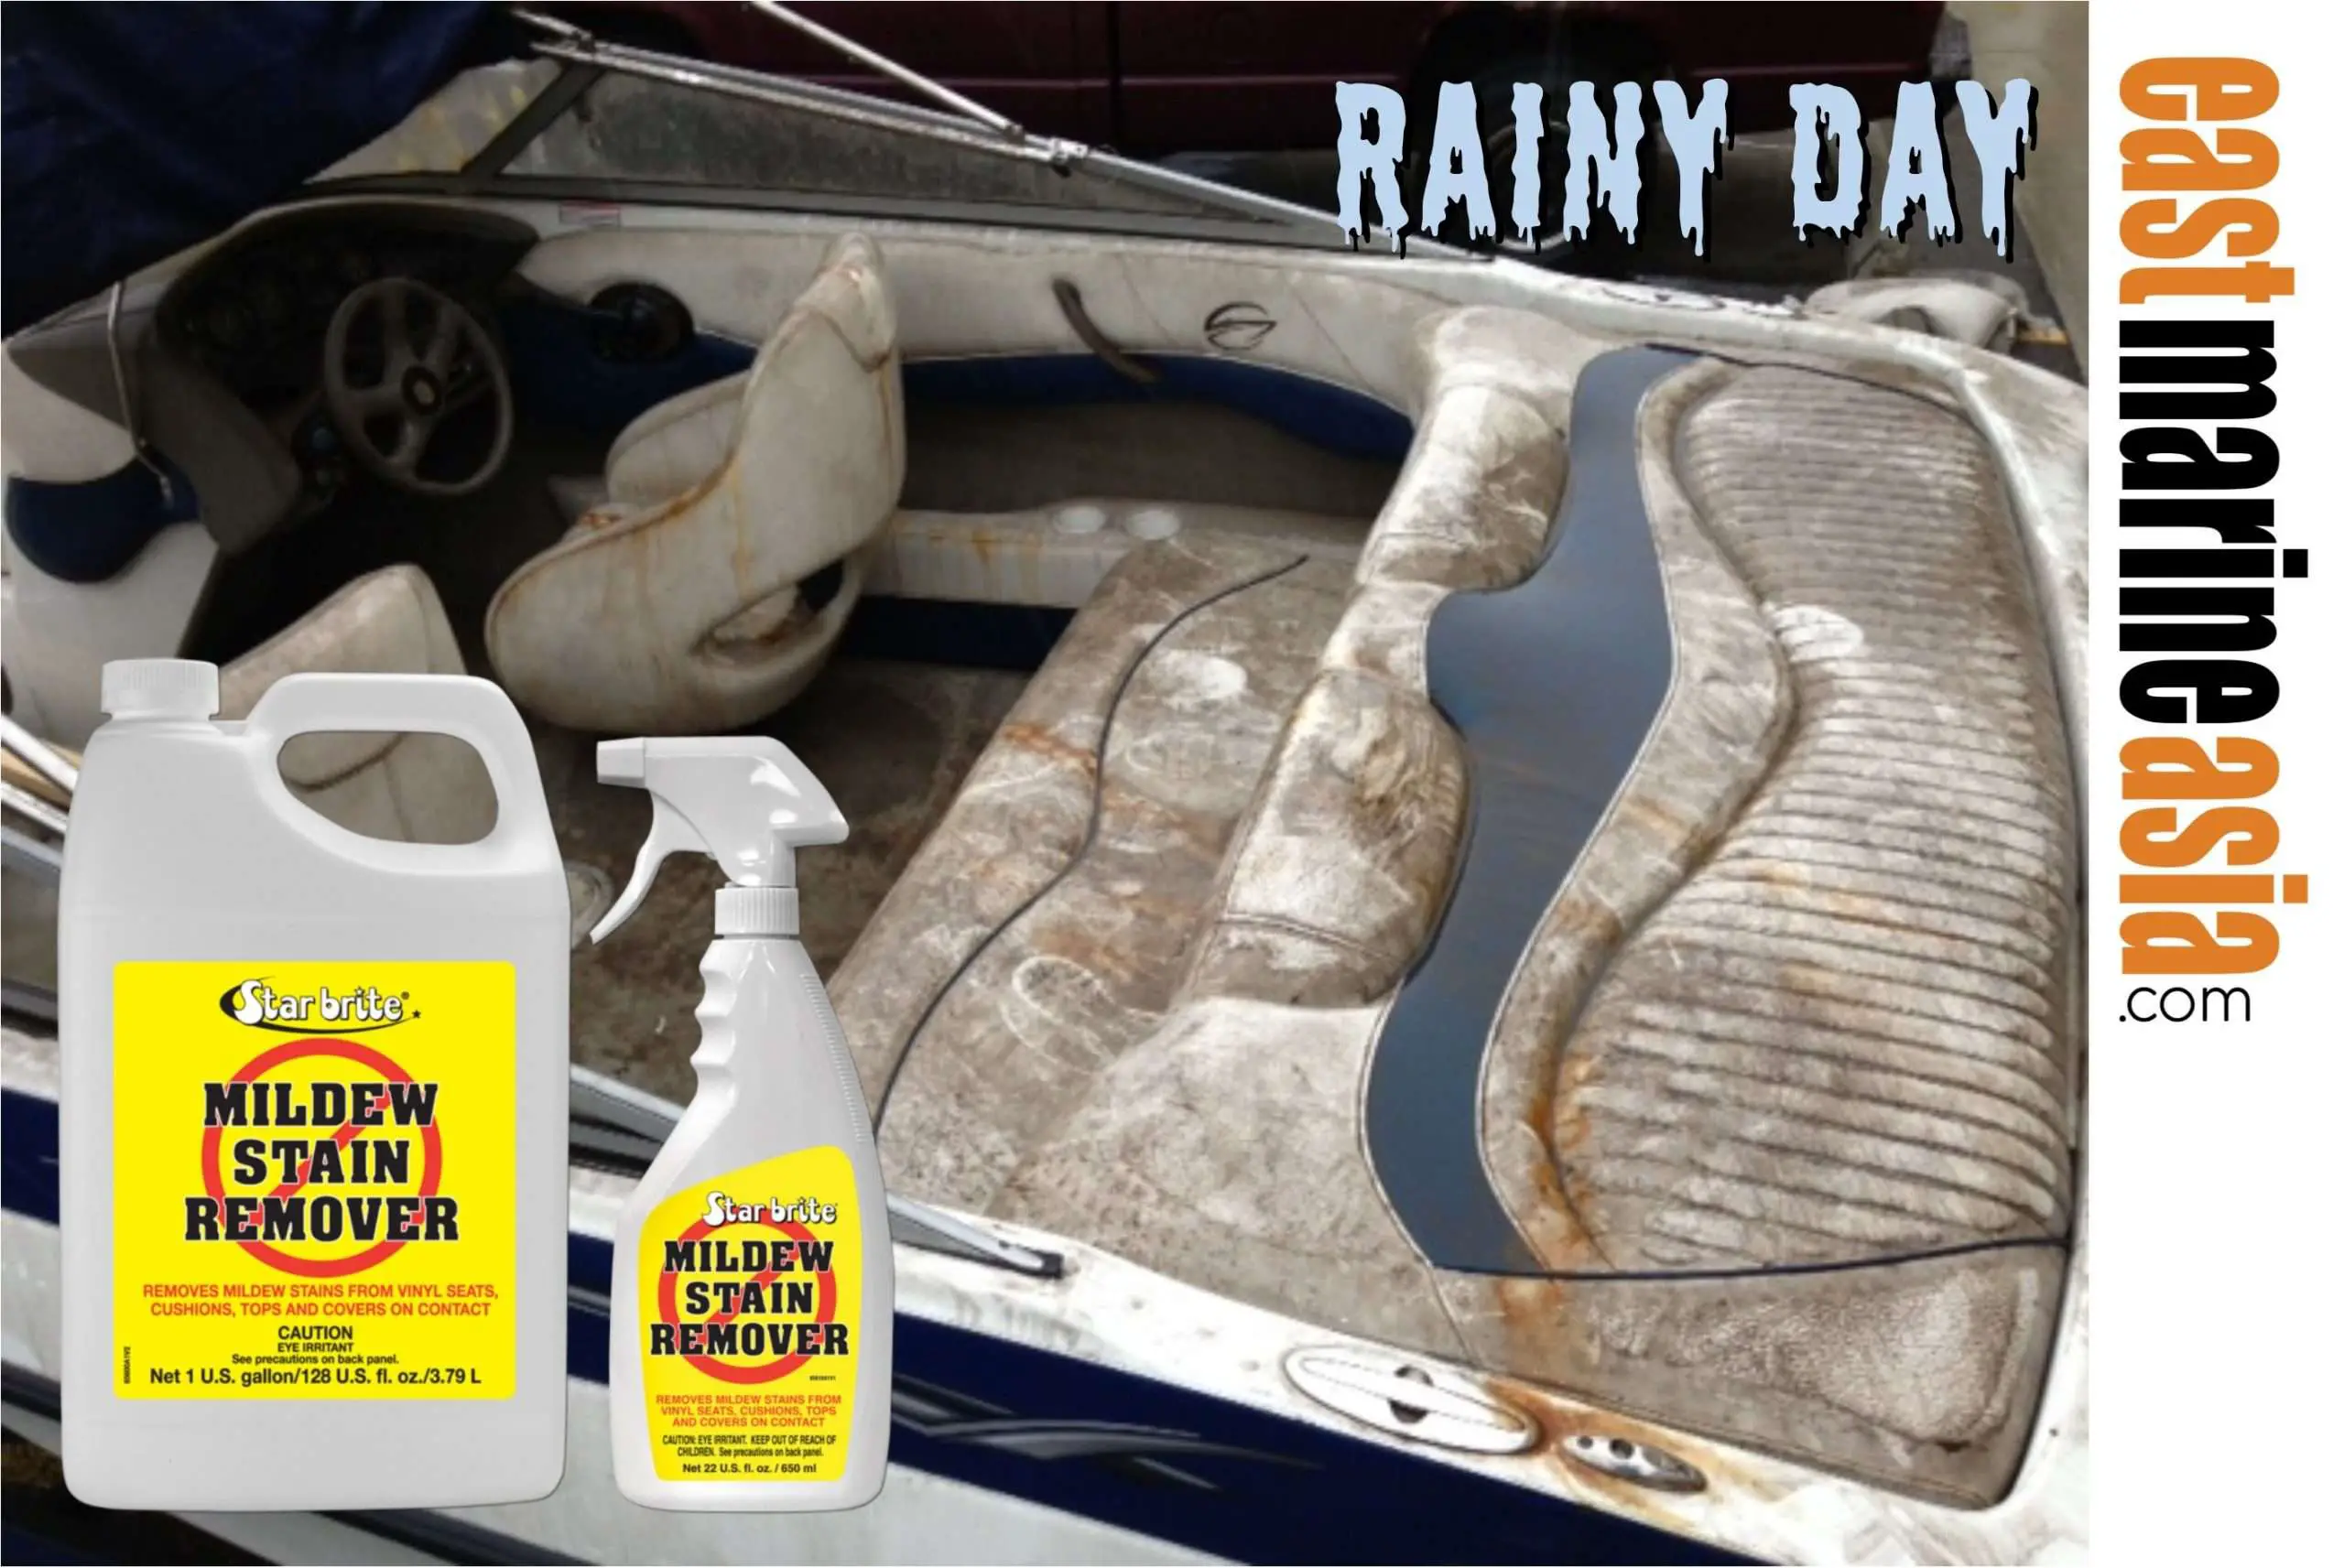  Rainy day ~~~ removes mildew stains from vinyl seats ...